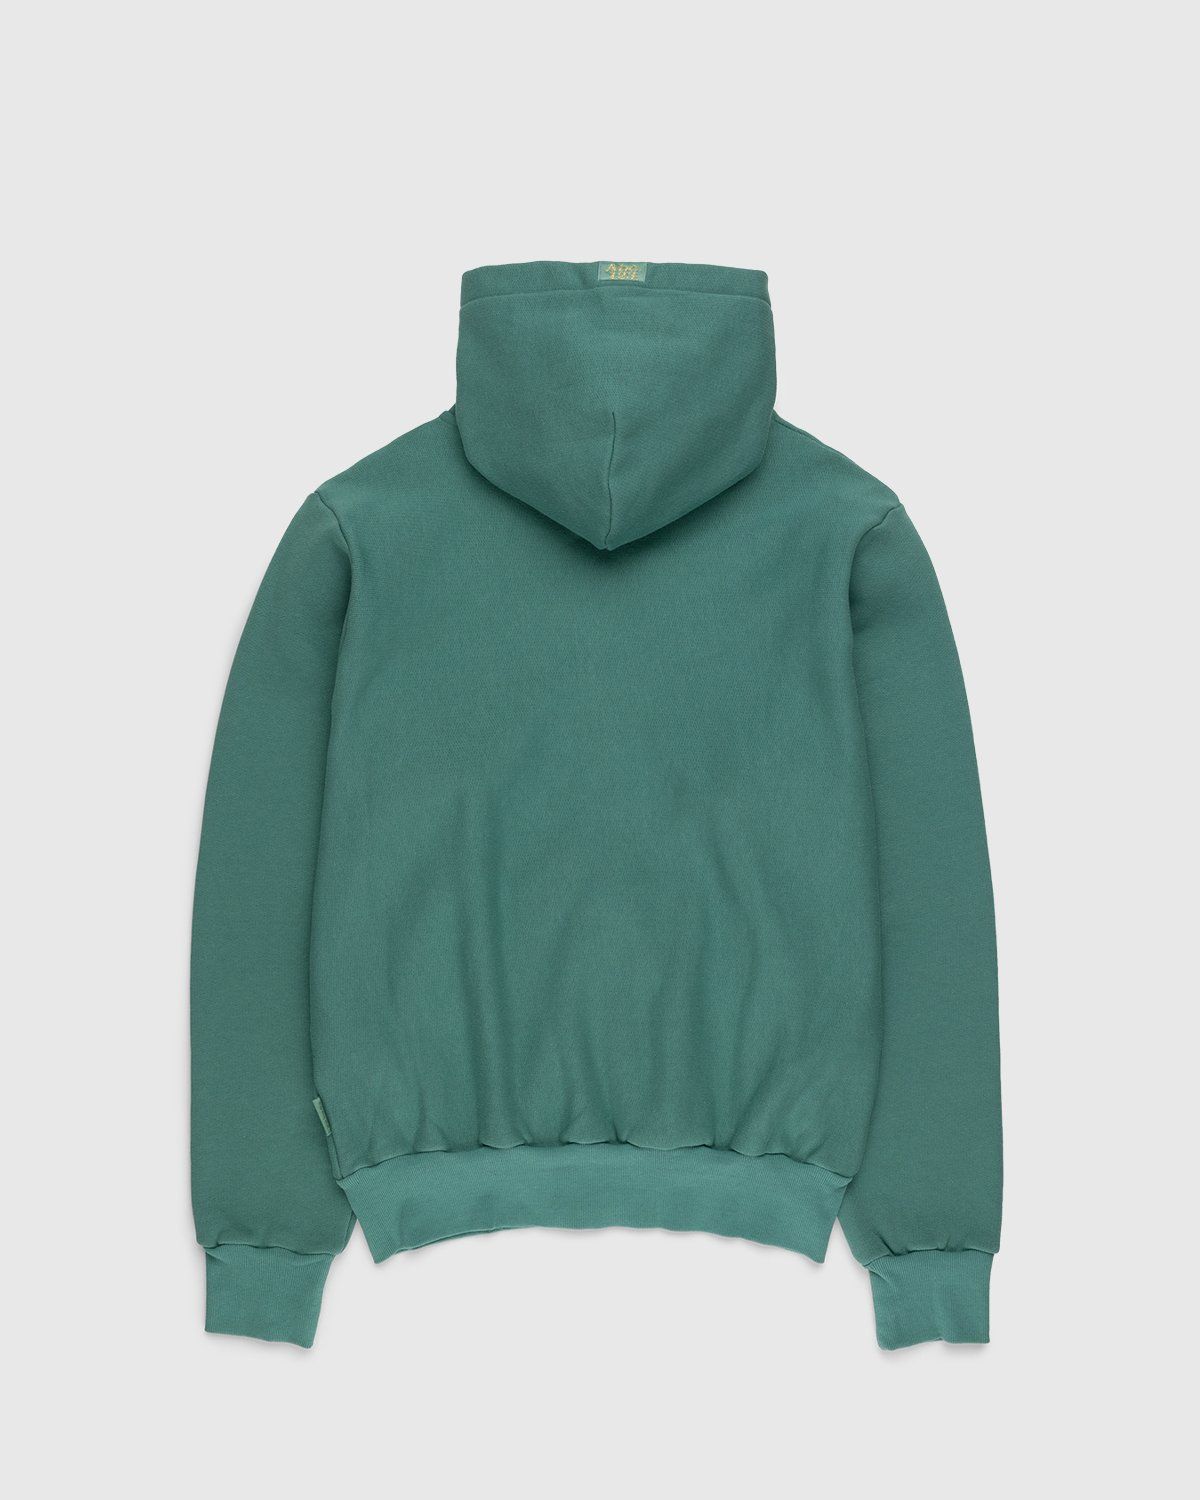 Abc. – Zip-Up French Terry Hoodie Apatite - Sweats - Green - Image 2